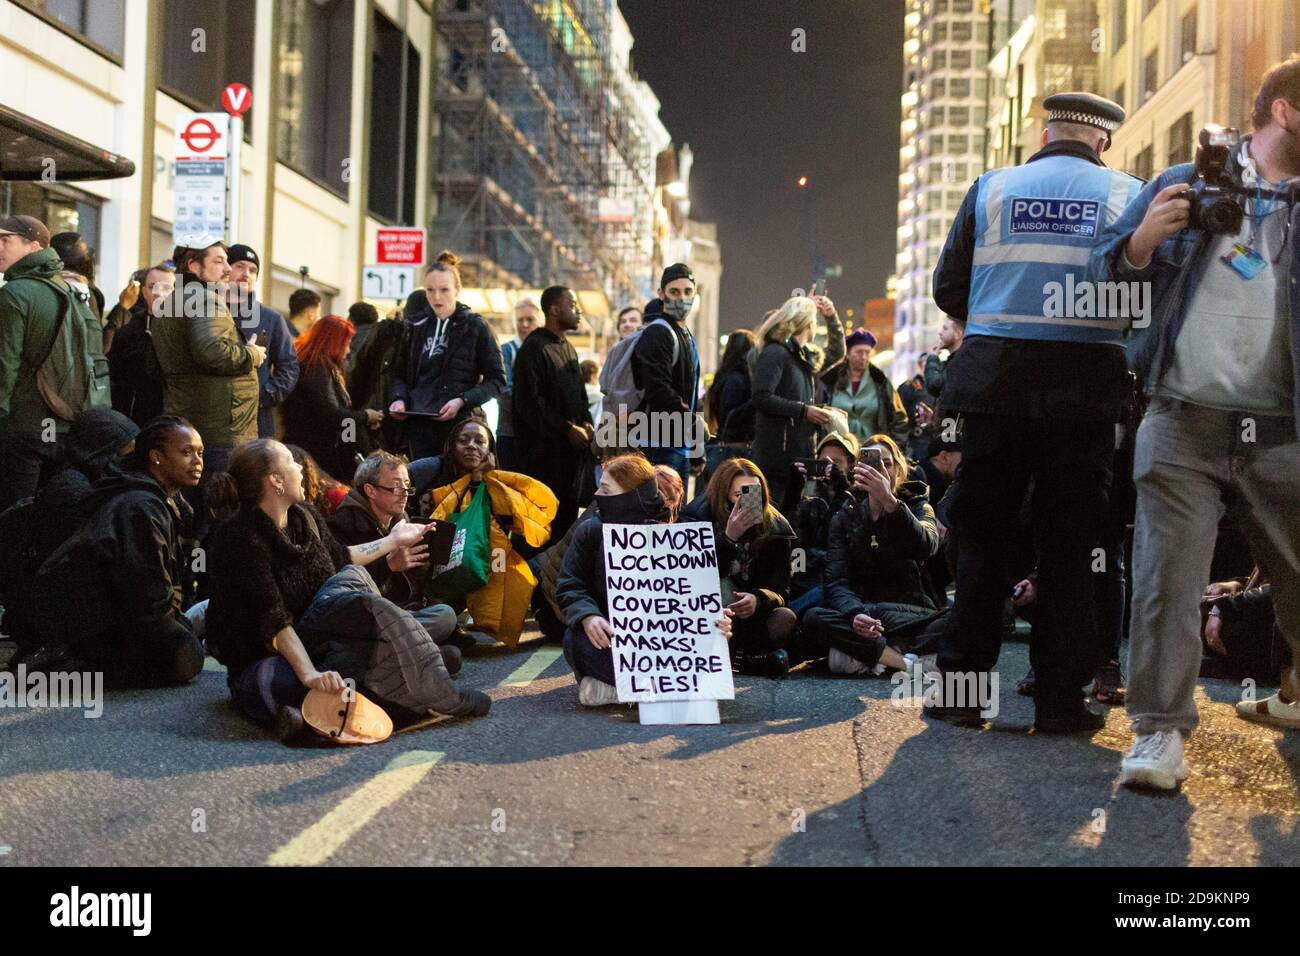 Protesters block a road during the Million Mask March attended by many lockdown sceptics, Oxford Street, London, 5 November 2020 Stock Photo